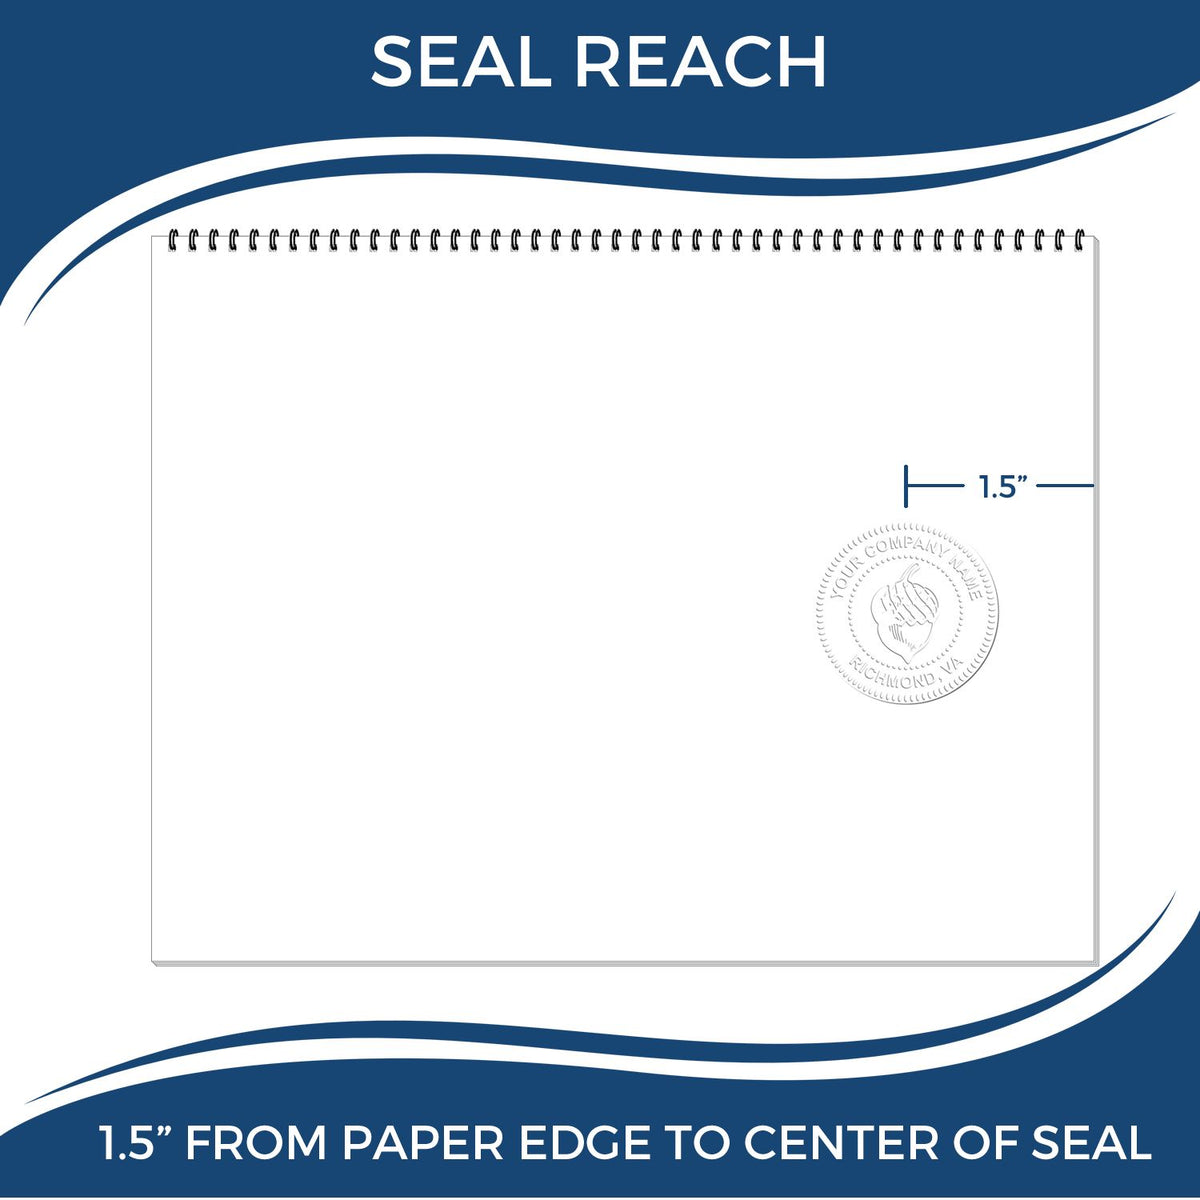 An infographic showing the seal reach which is represented by a ruler and a miniature seal image of the Soft Pocket Missouri Landscape Architect Embosser